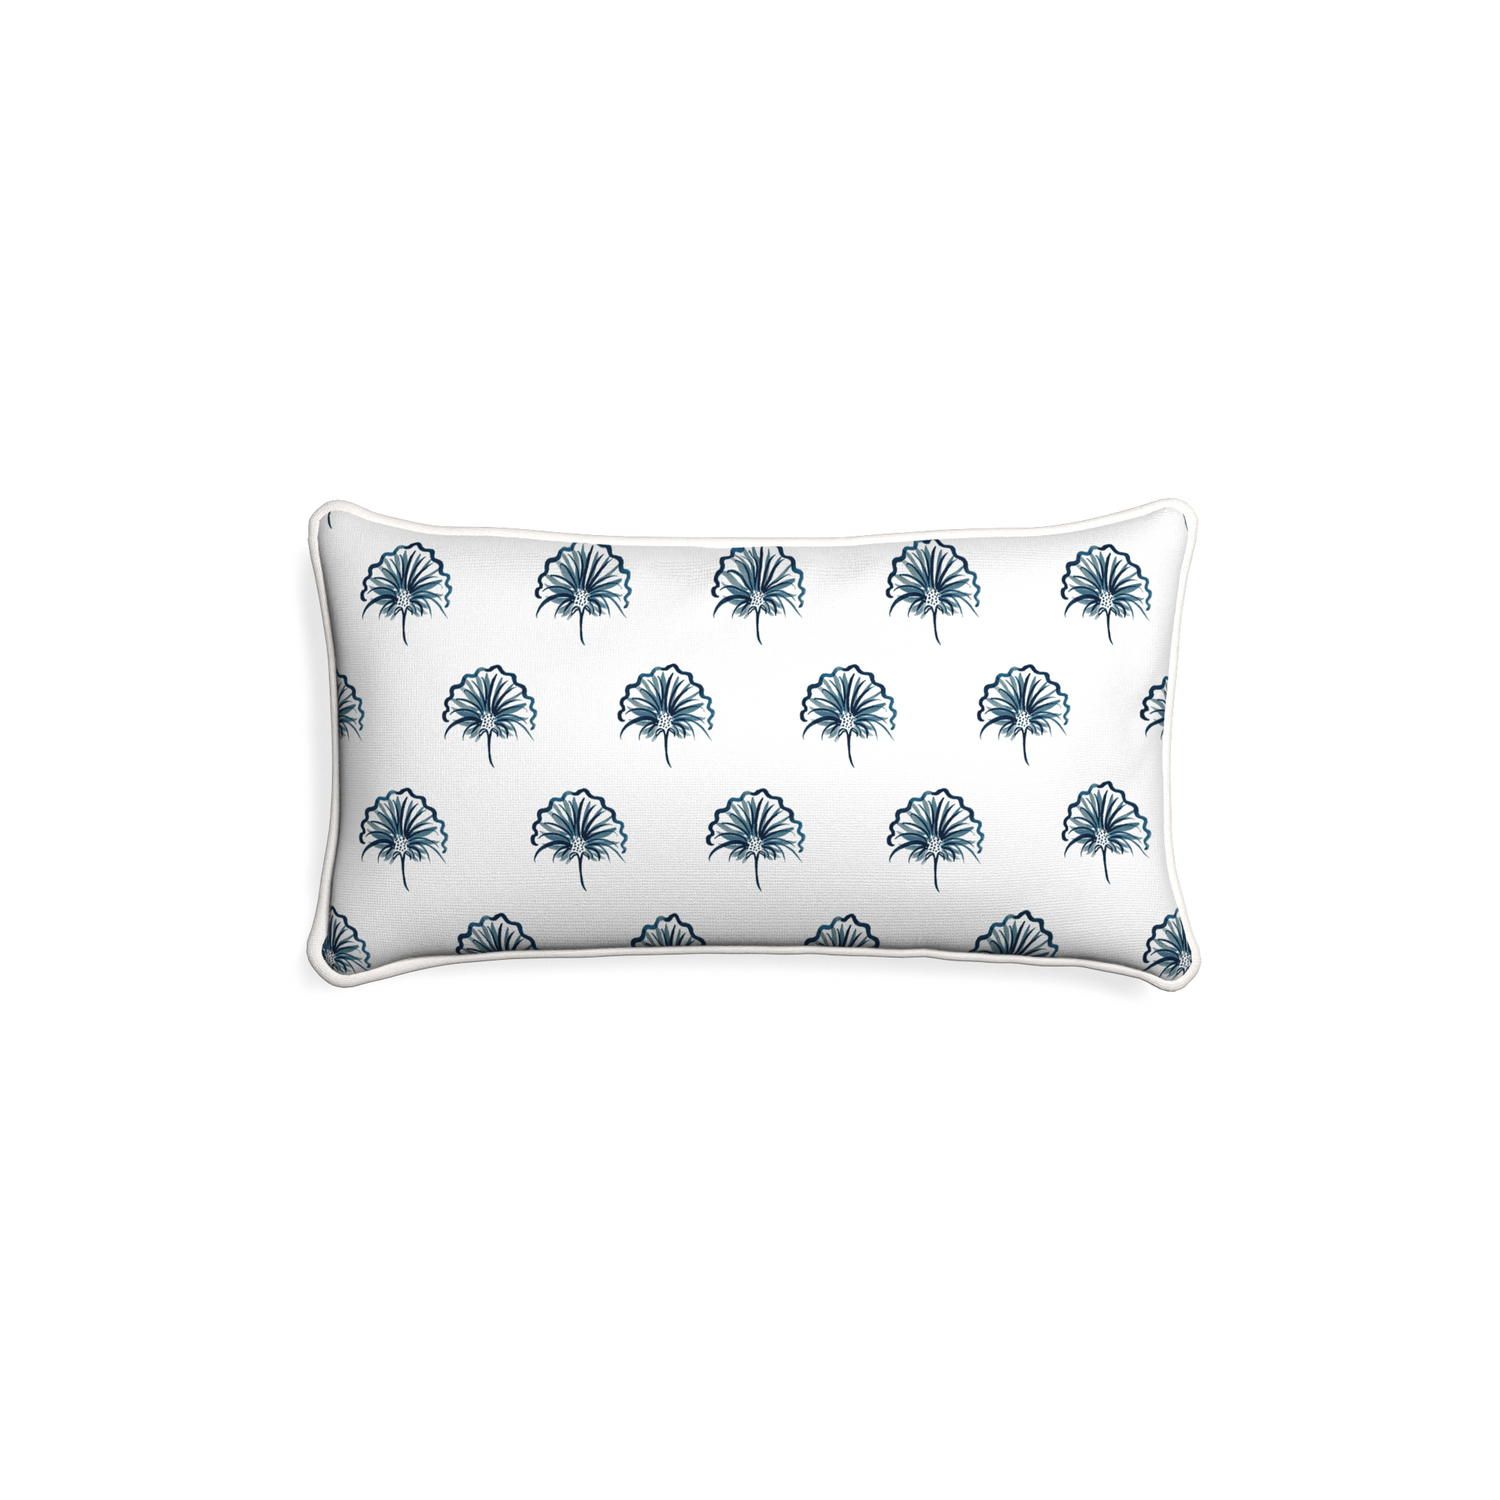 Petite-lumbar penelope midnight custom floral navypillow with snow piping on white background